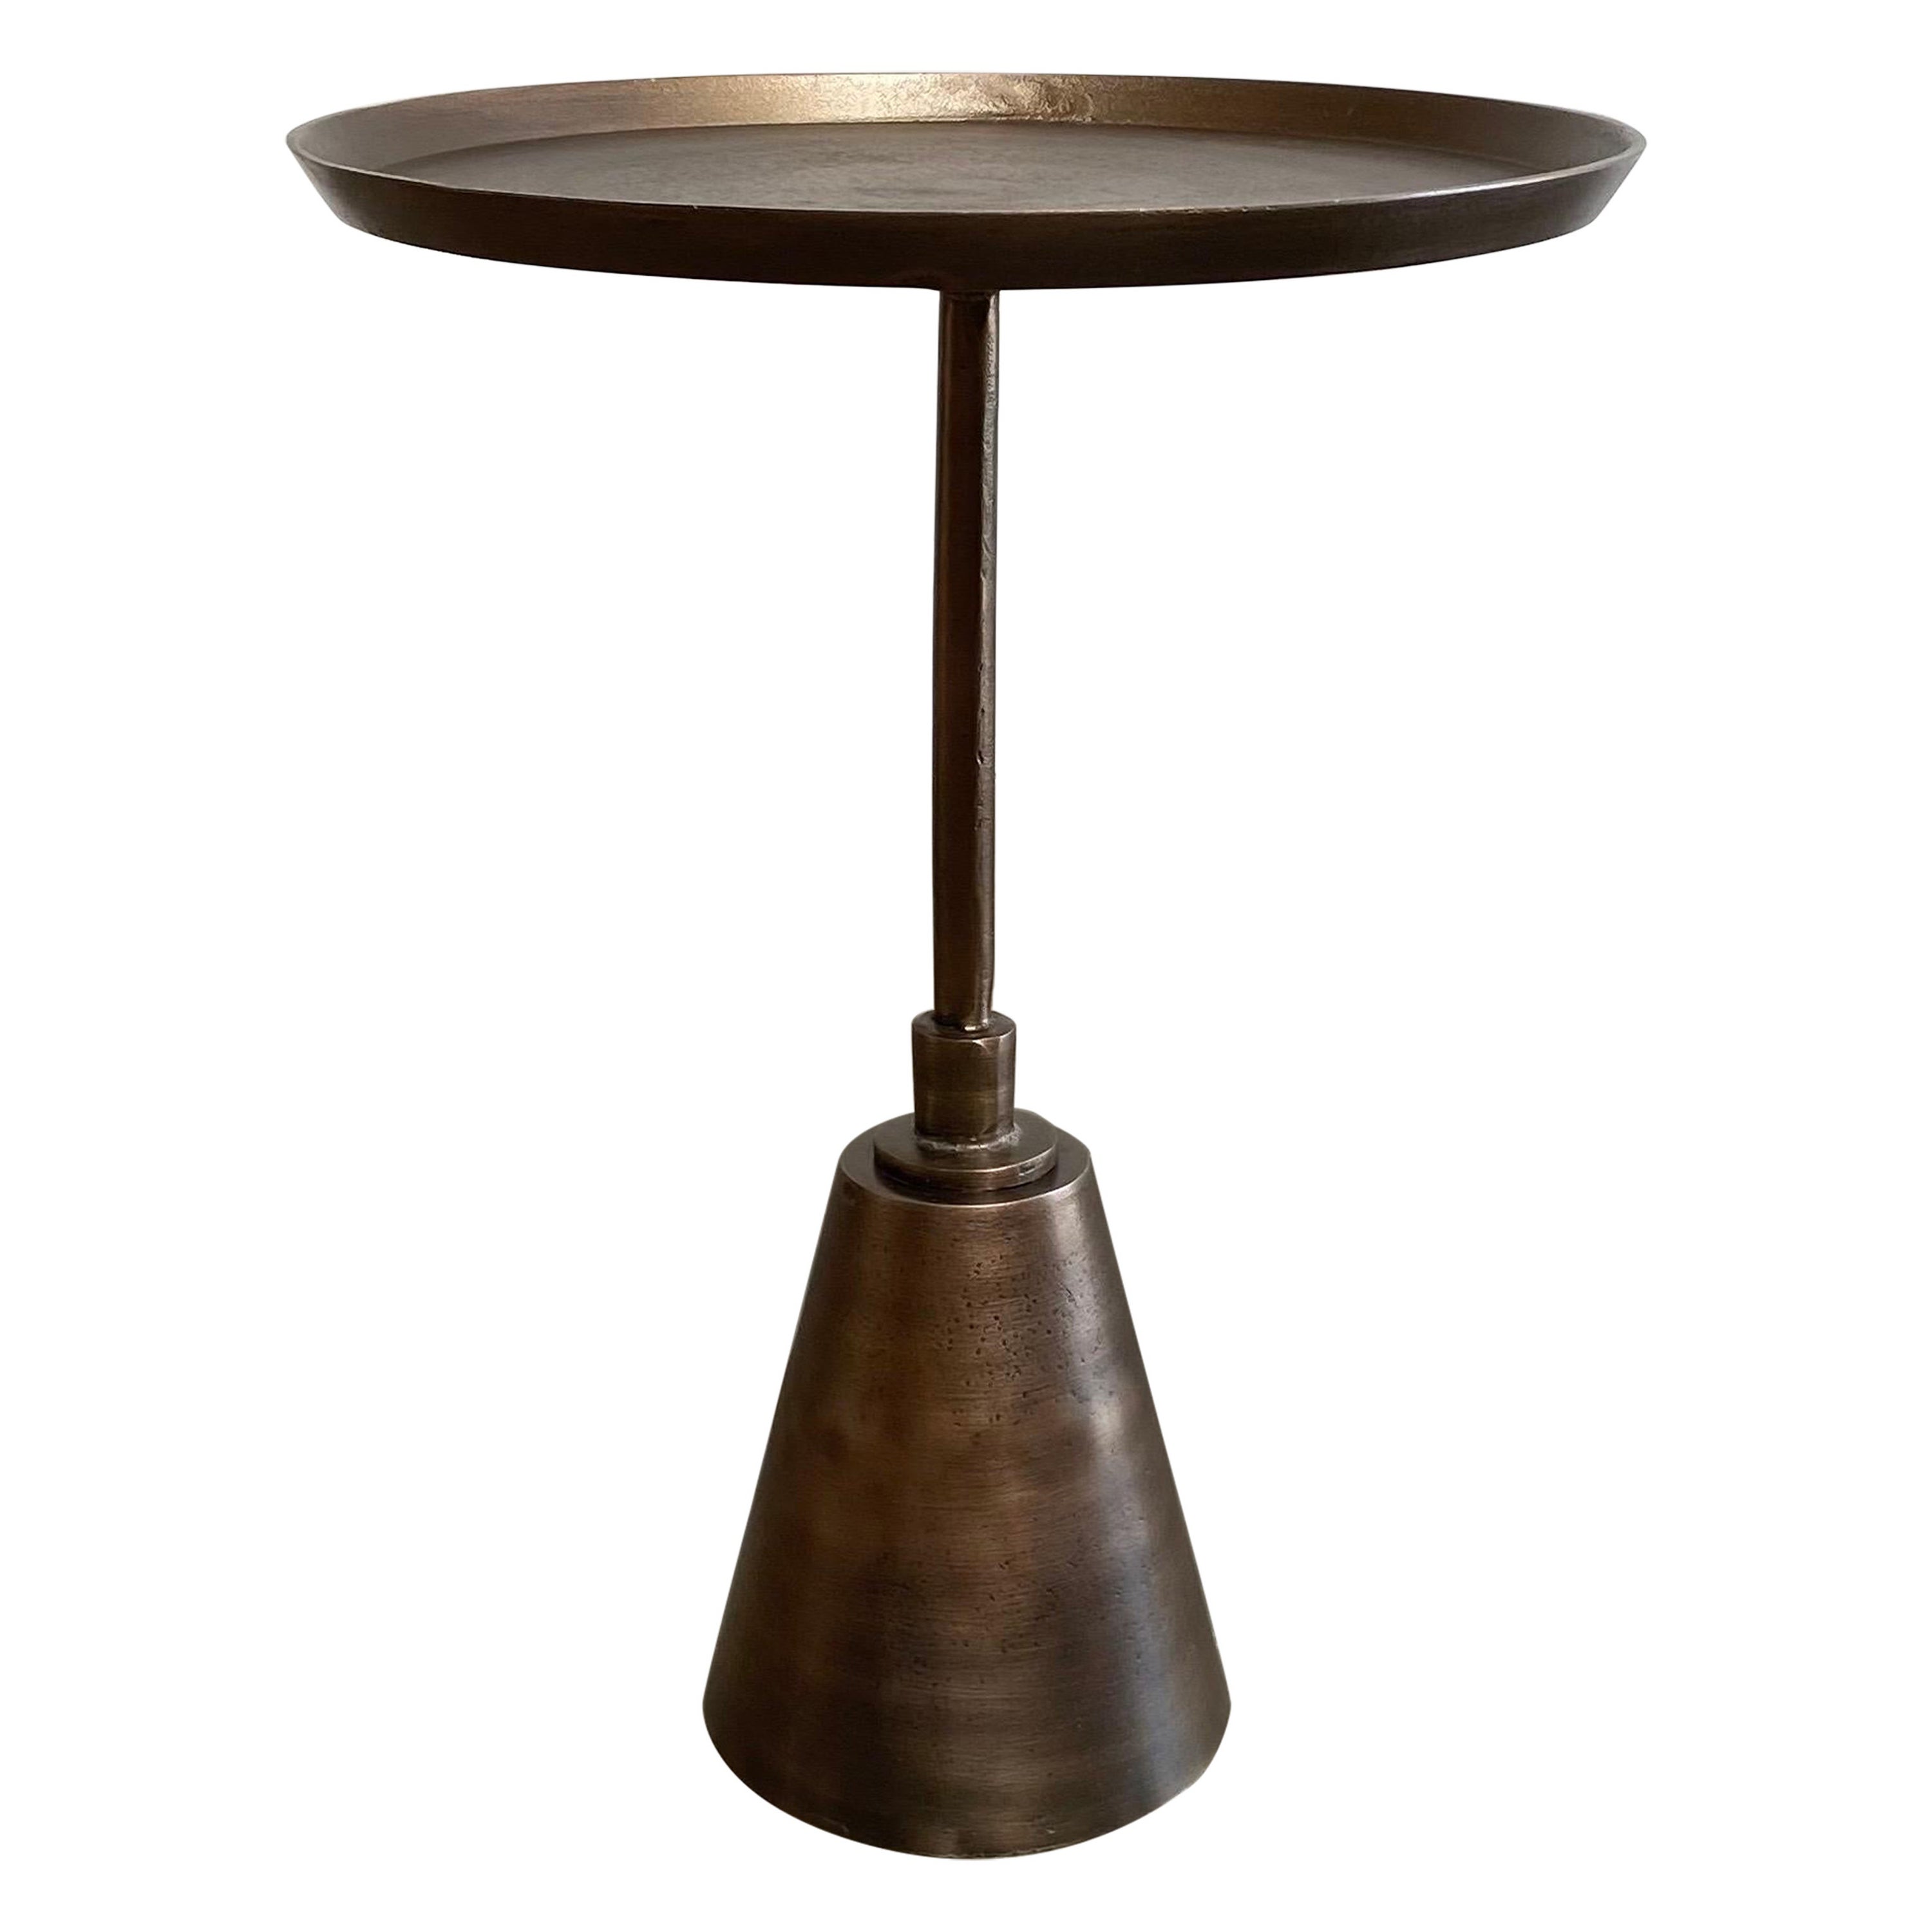 Modern Style Side Table in an Antique Brass Colored Finish